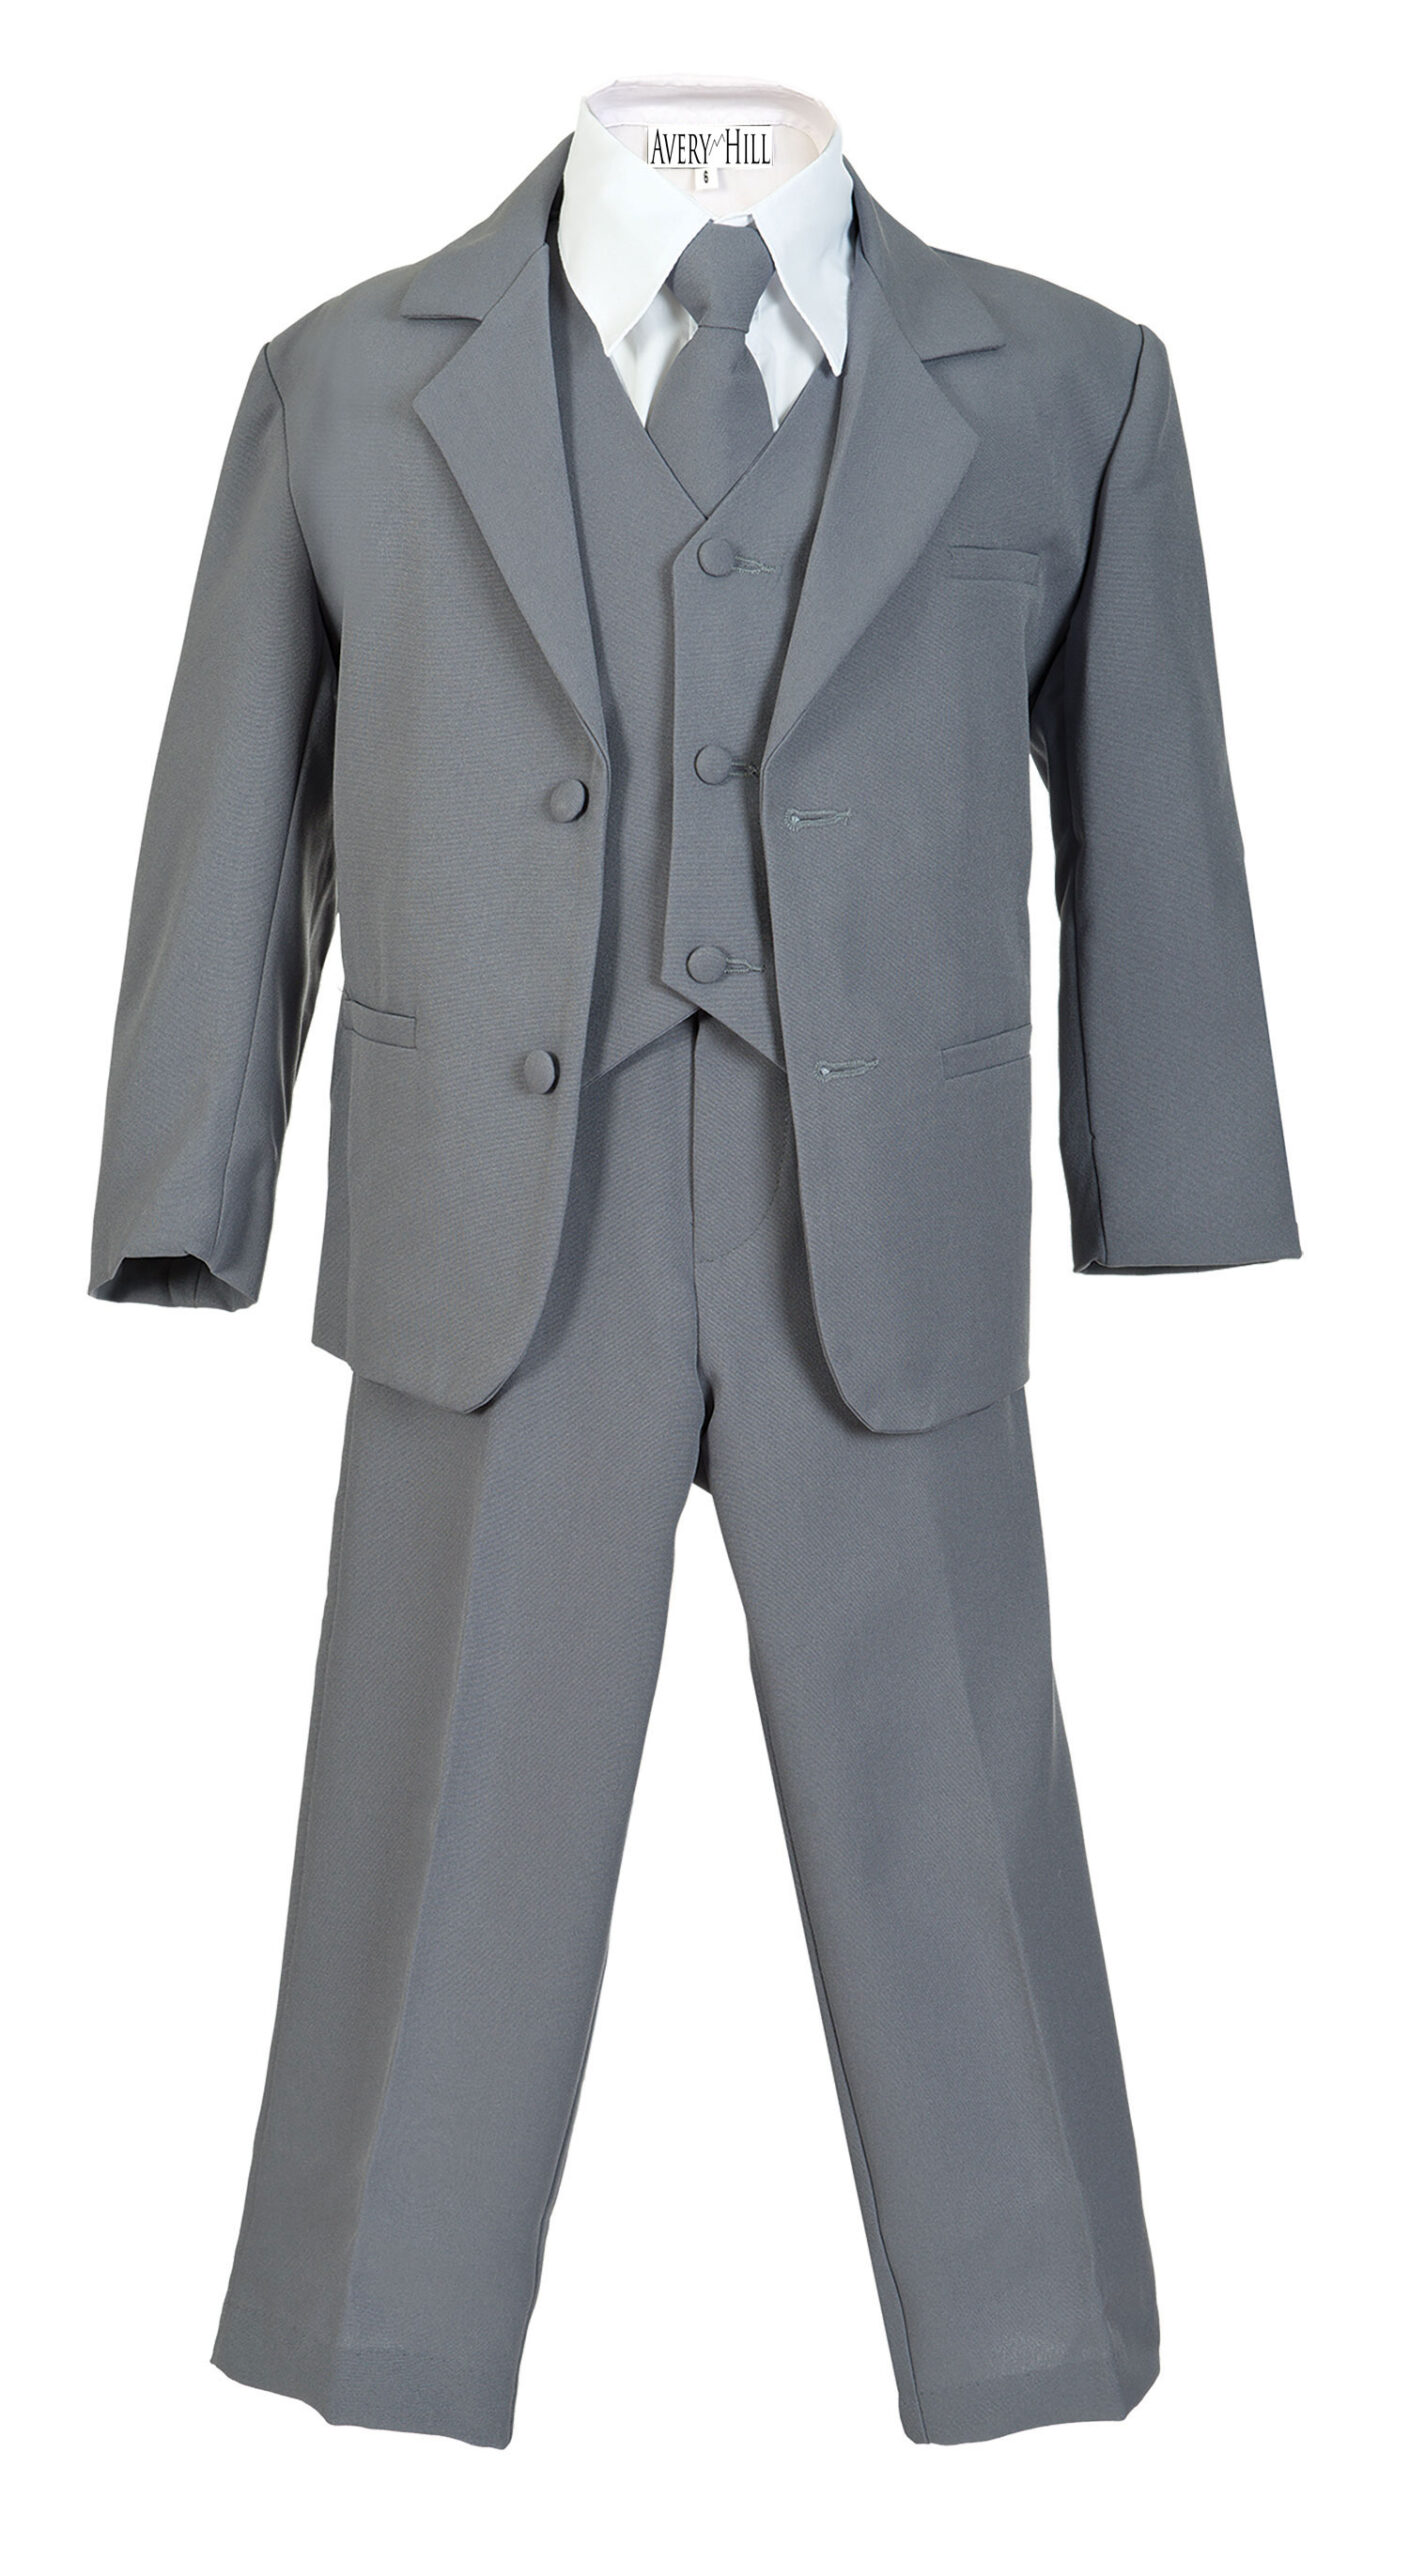 Avery Hill Boys Formal 5 Piece Suit with Shirt and Vest Slate Gray - 8